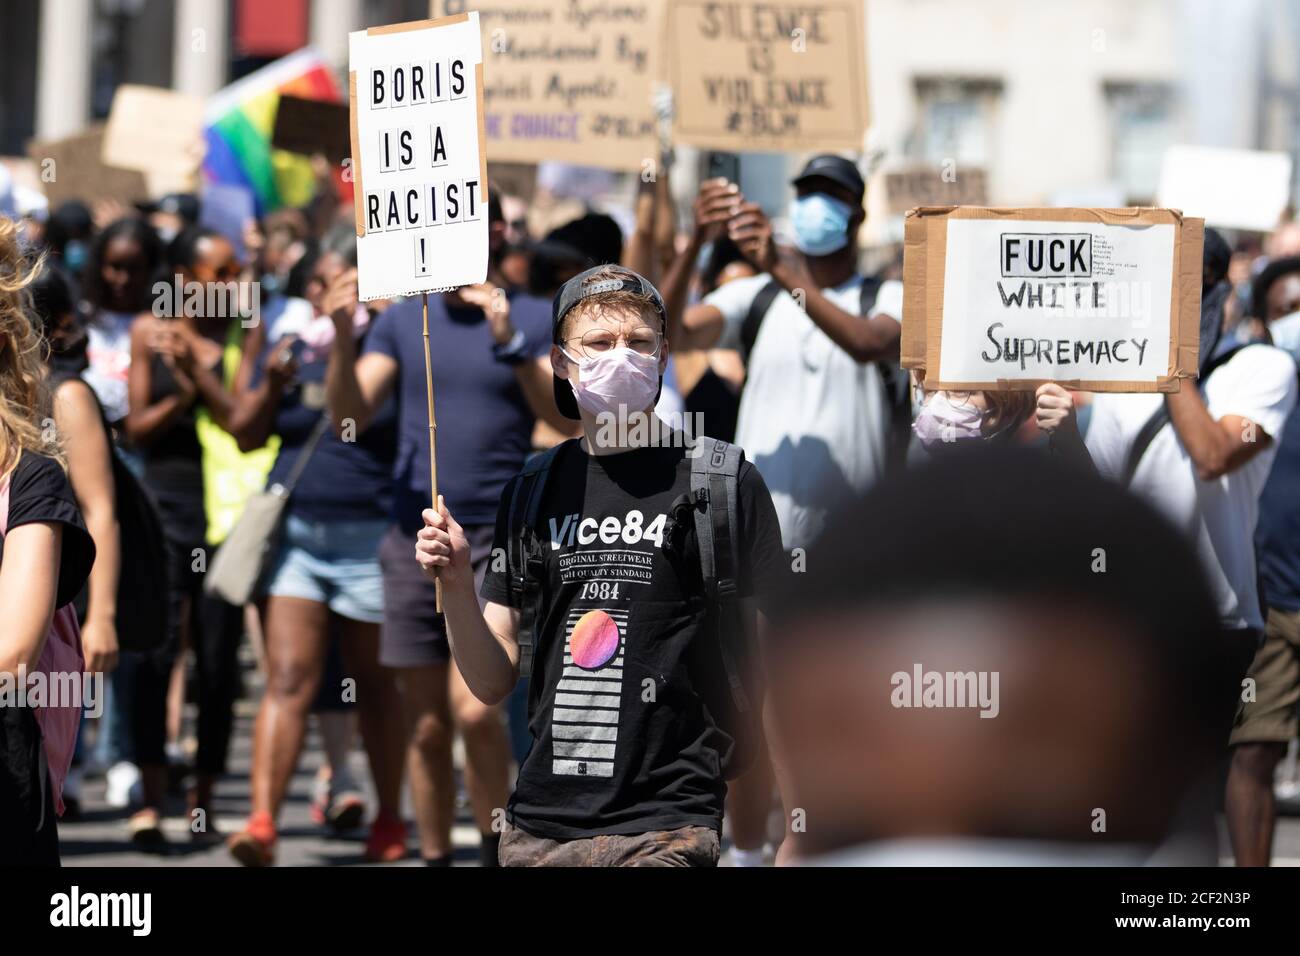 A white male protester holds a sign saying Boris is a Racist at a Black Lives Matter protest in Trafalgar Square, London Stock Photo